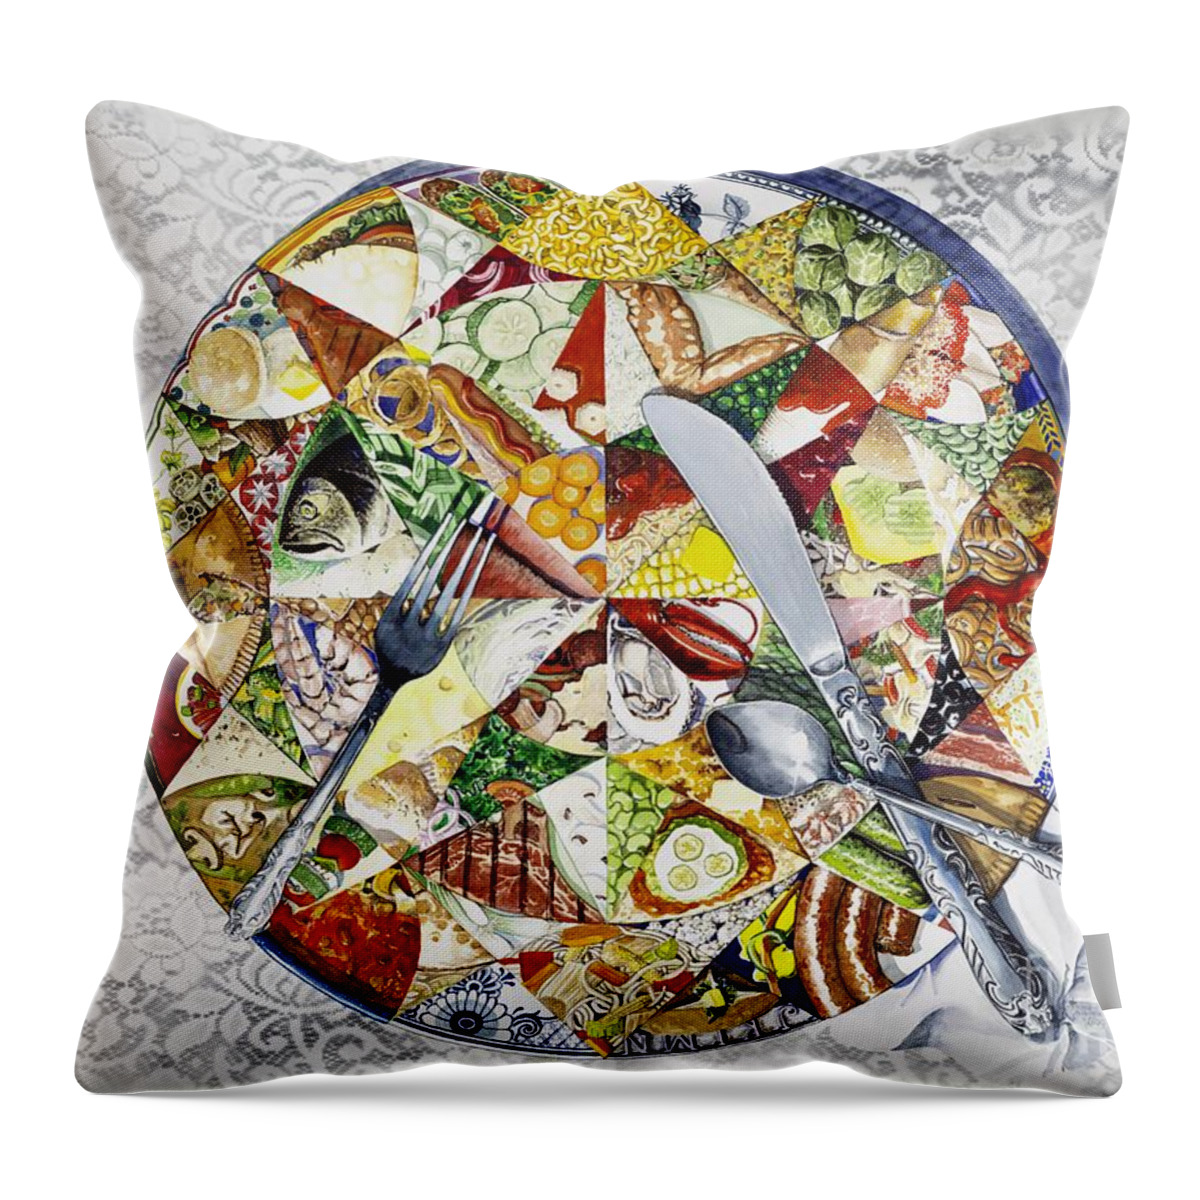 Kaleidoscope Throw Pillow featuring the painting What's For Dinner? by Merana Cadorette